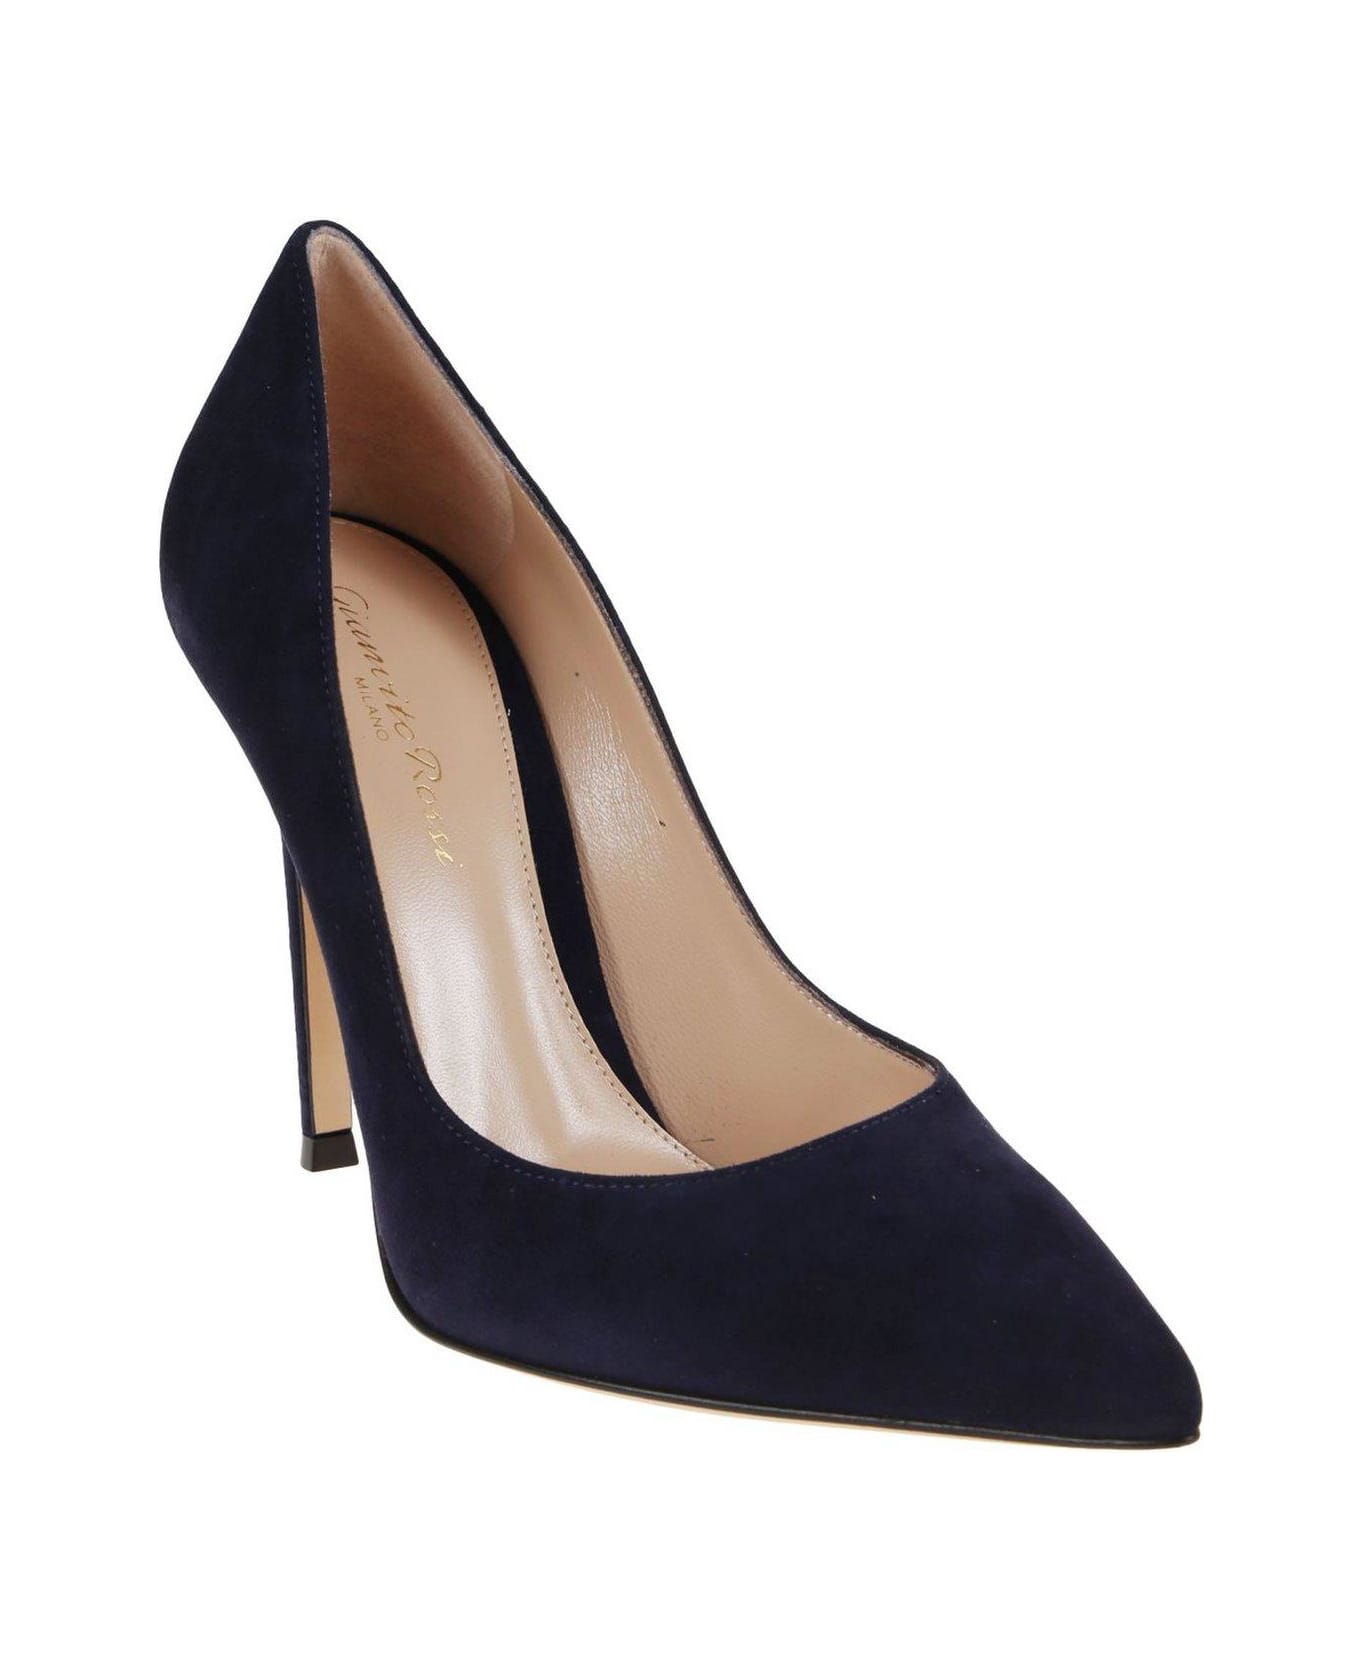 Gianvito Rossi Pointed Toe Pumps - Blue ハイヒール